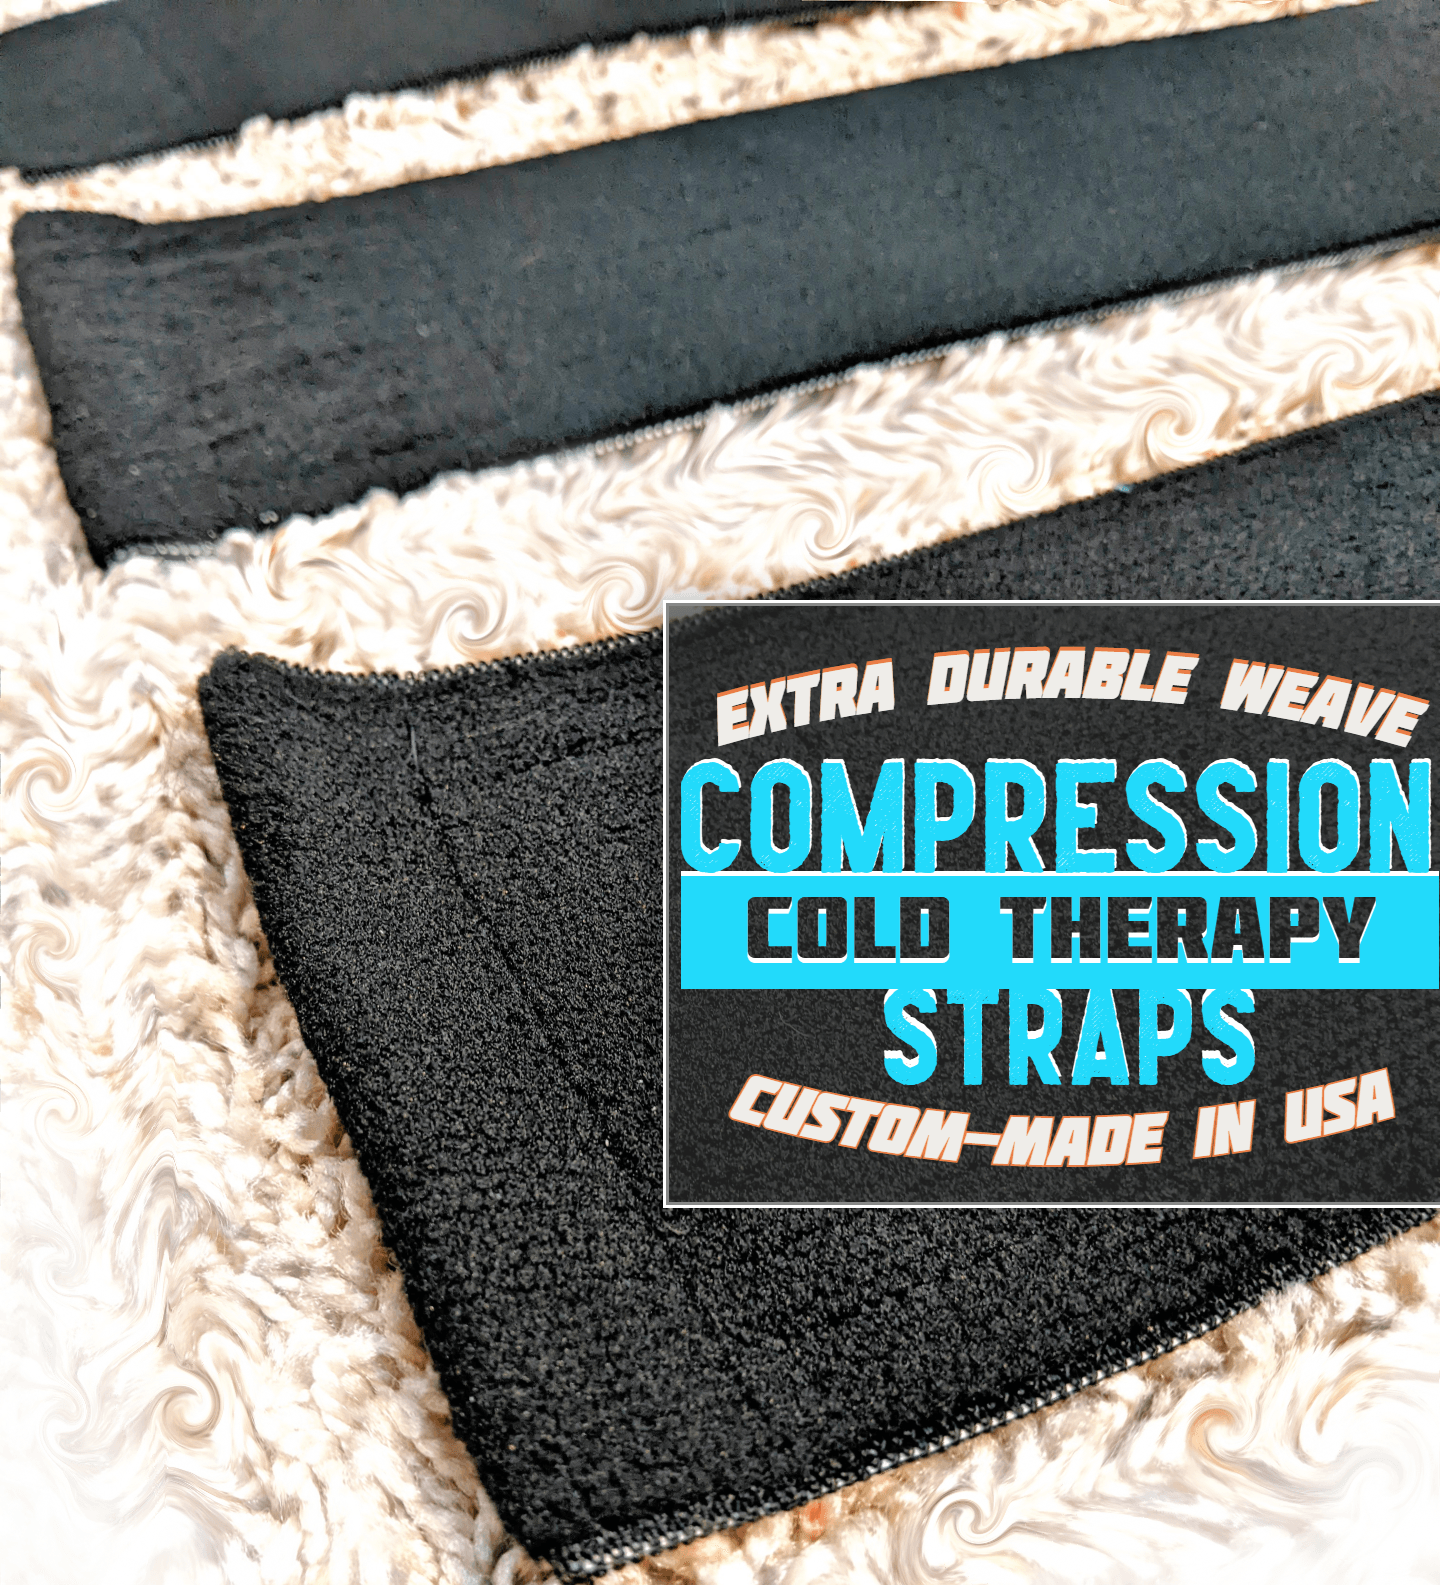 Compression Straps images by Supply Physical Therapy